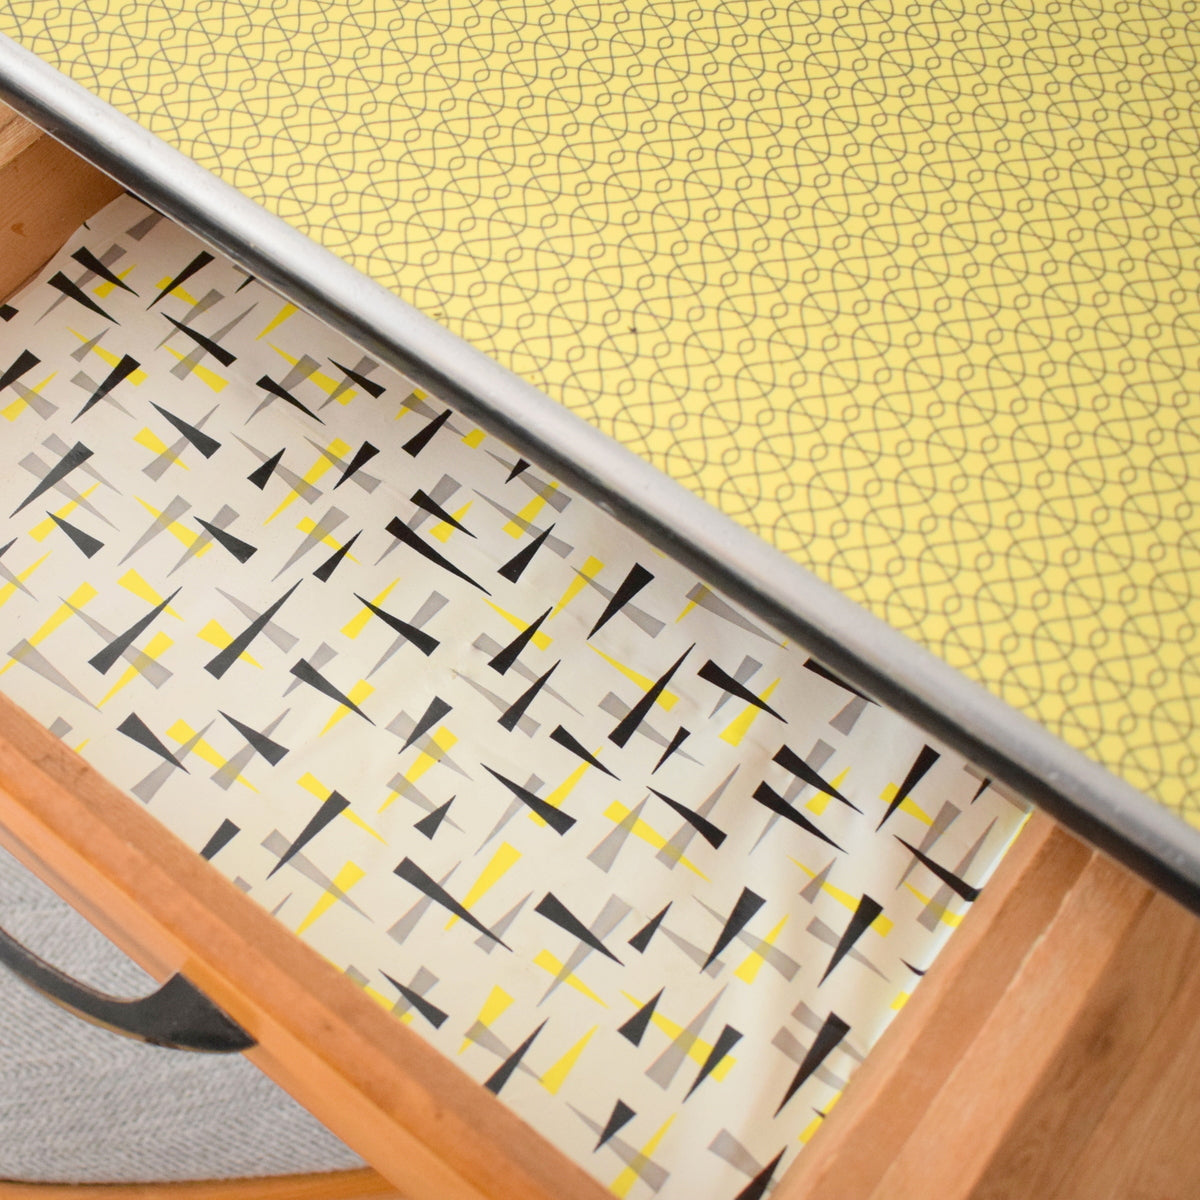 Vintage 1950s Formica Table - Fantastic Printed Formica - Ideal Desk, Yellow / Black & Chair